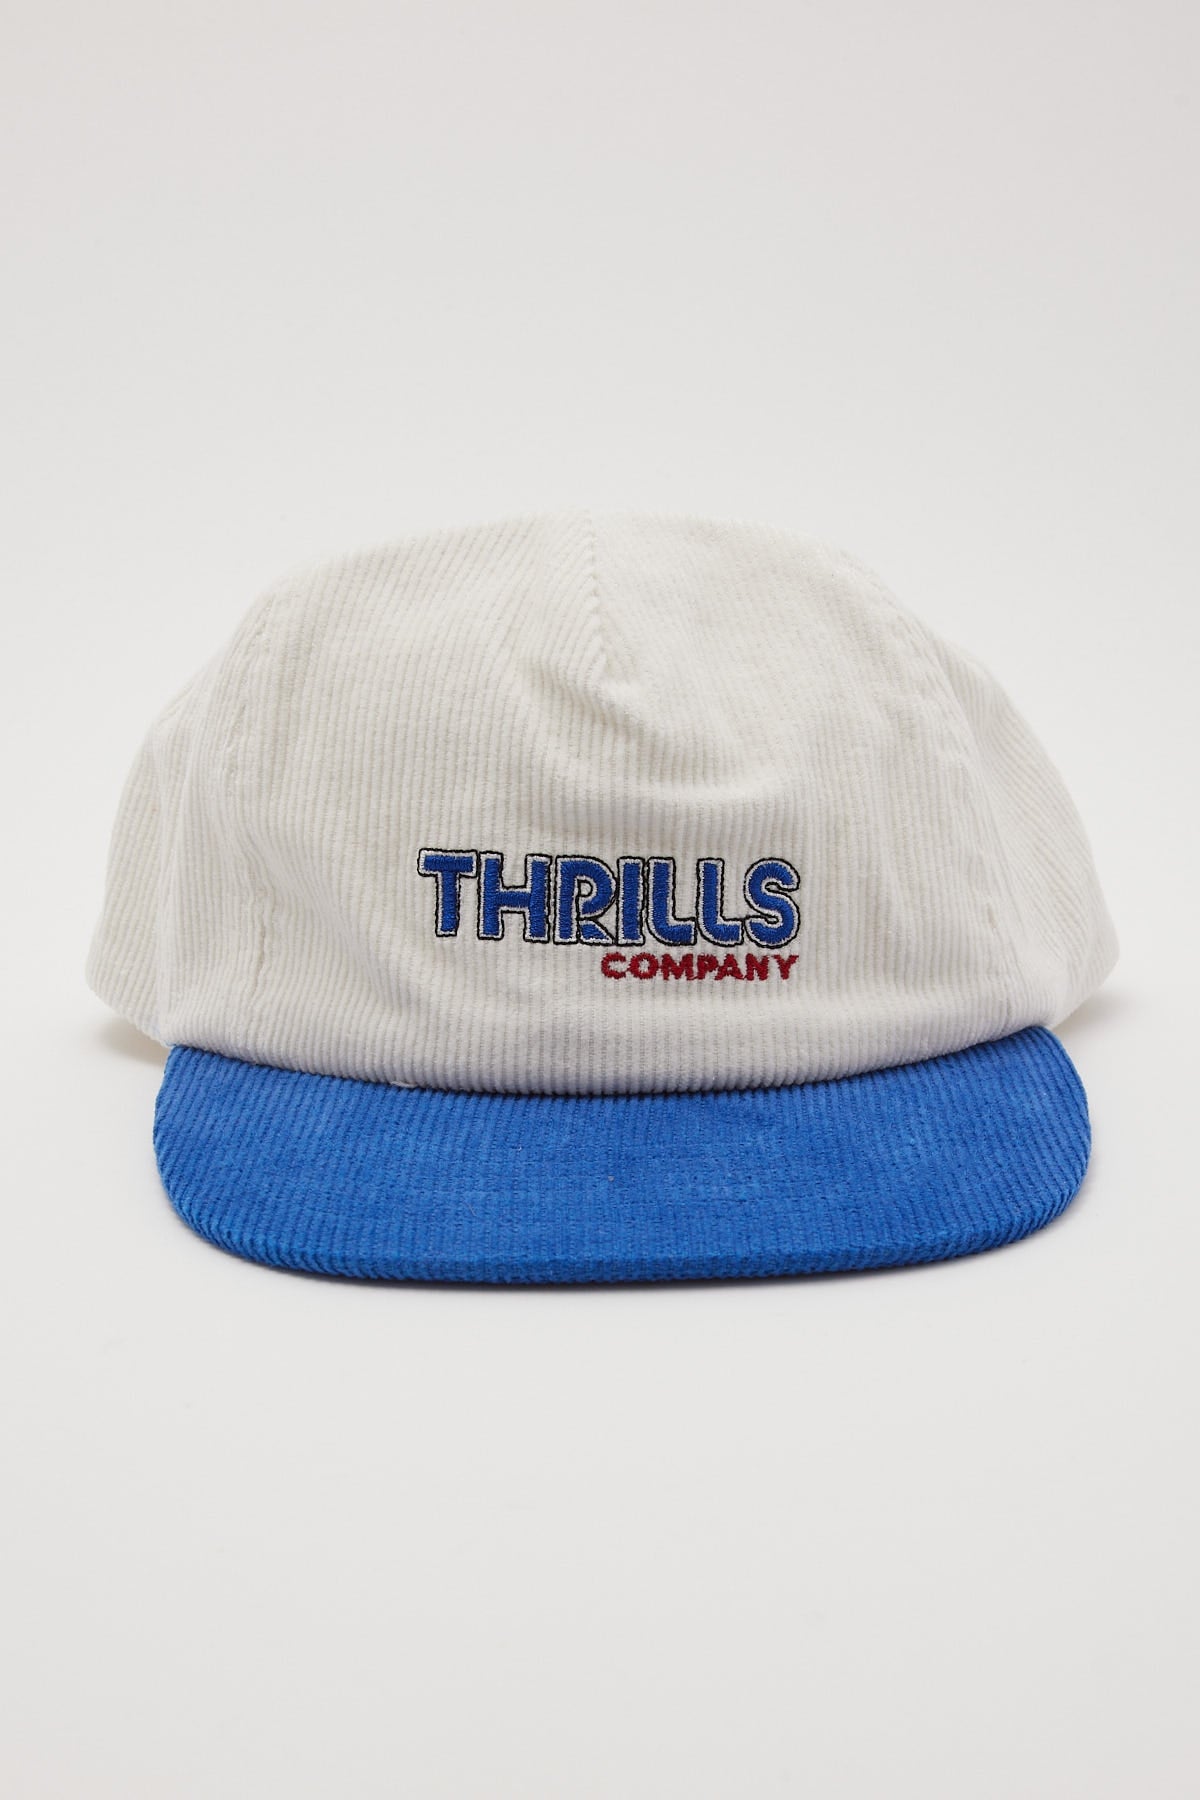 Thrills Going The Stance 5 Panel Cap Washed Royal cord